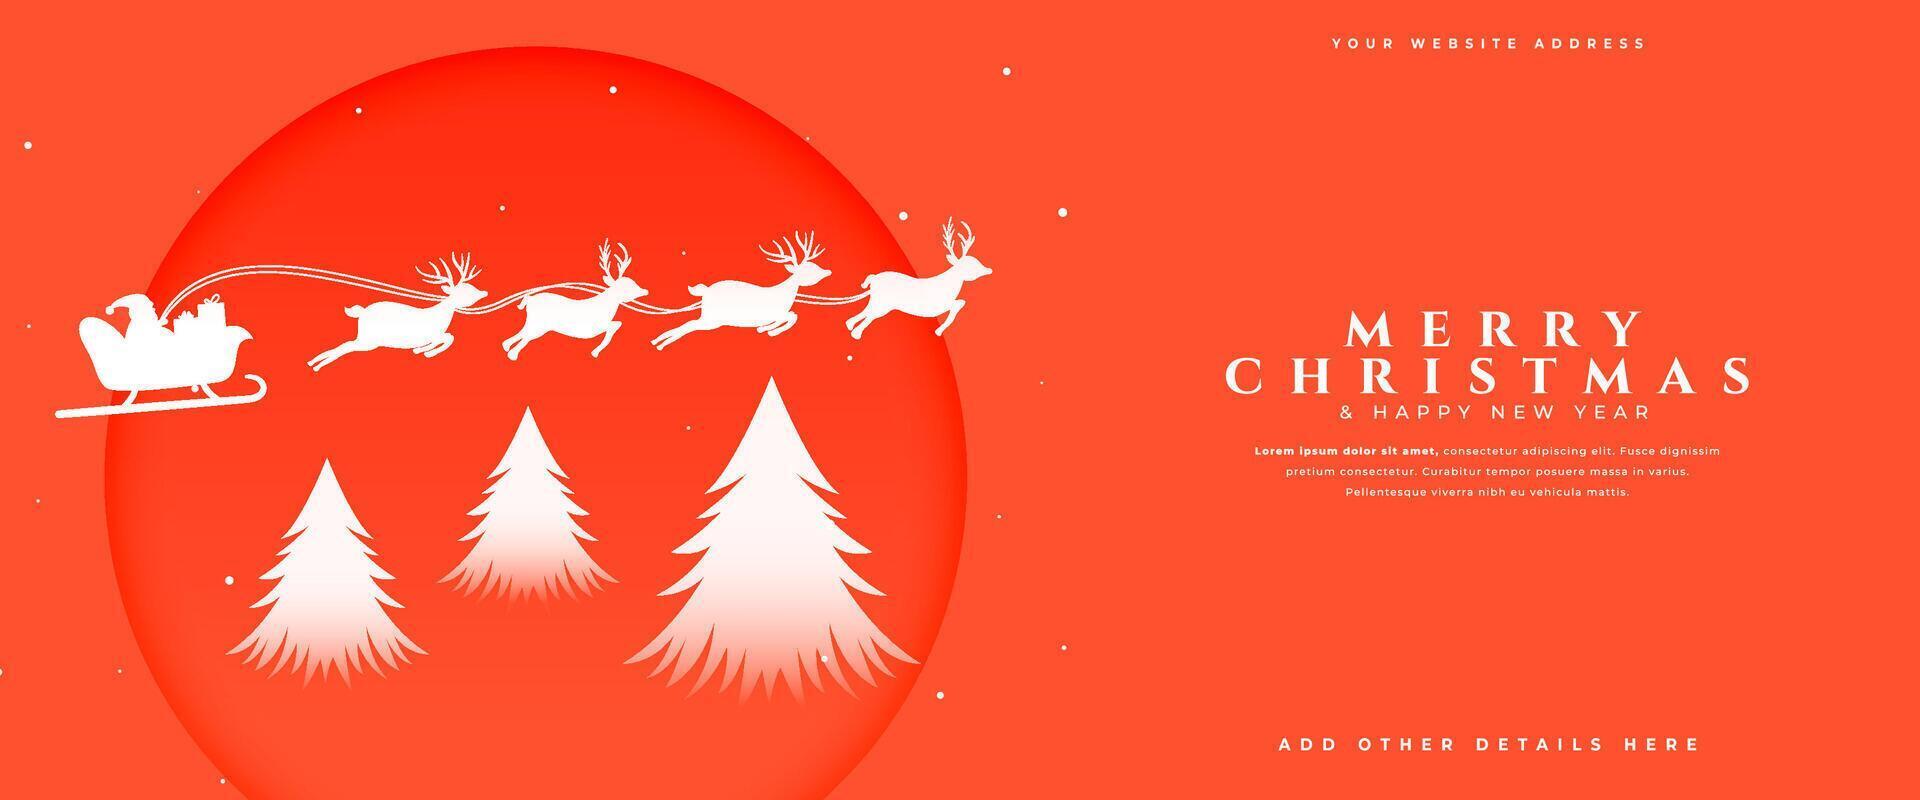 merry christmas eve wishes banner with flying santa sleigh design vector